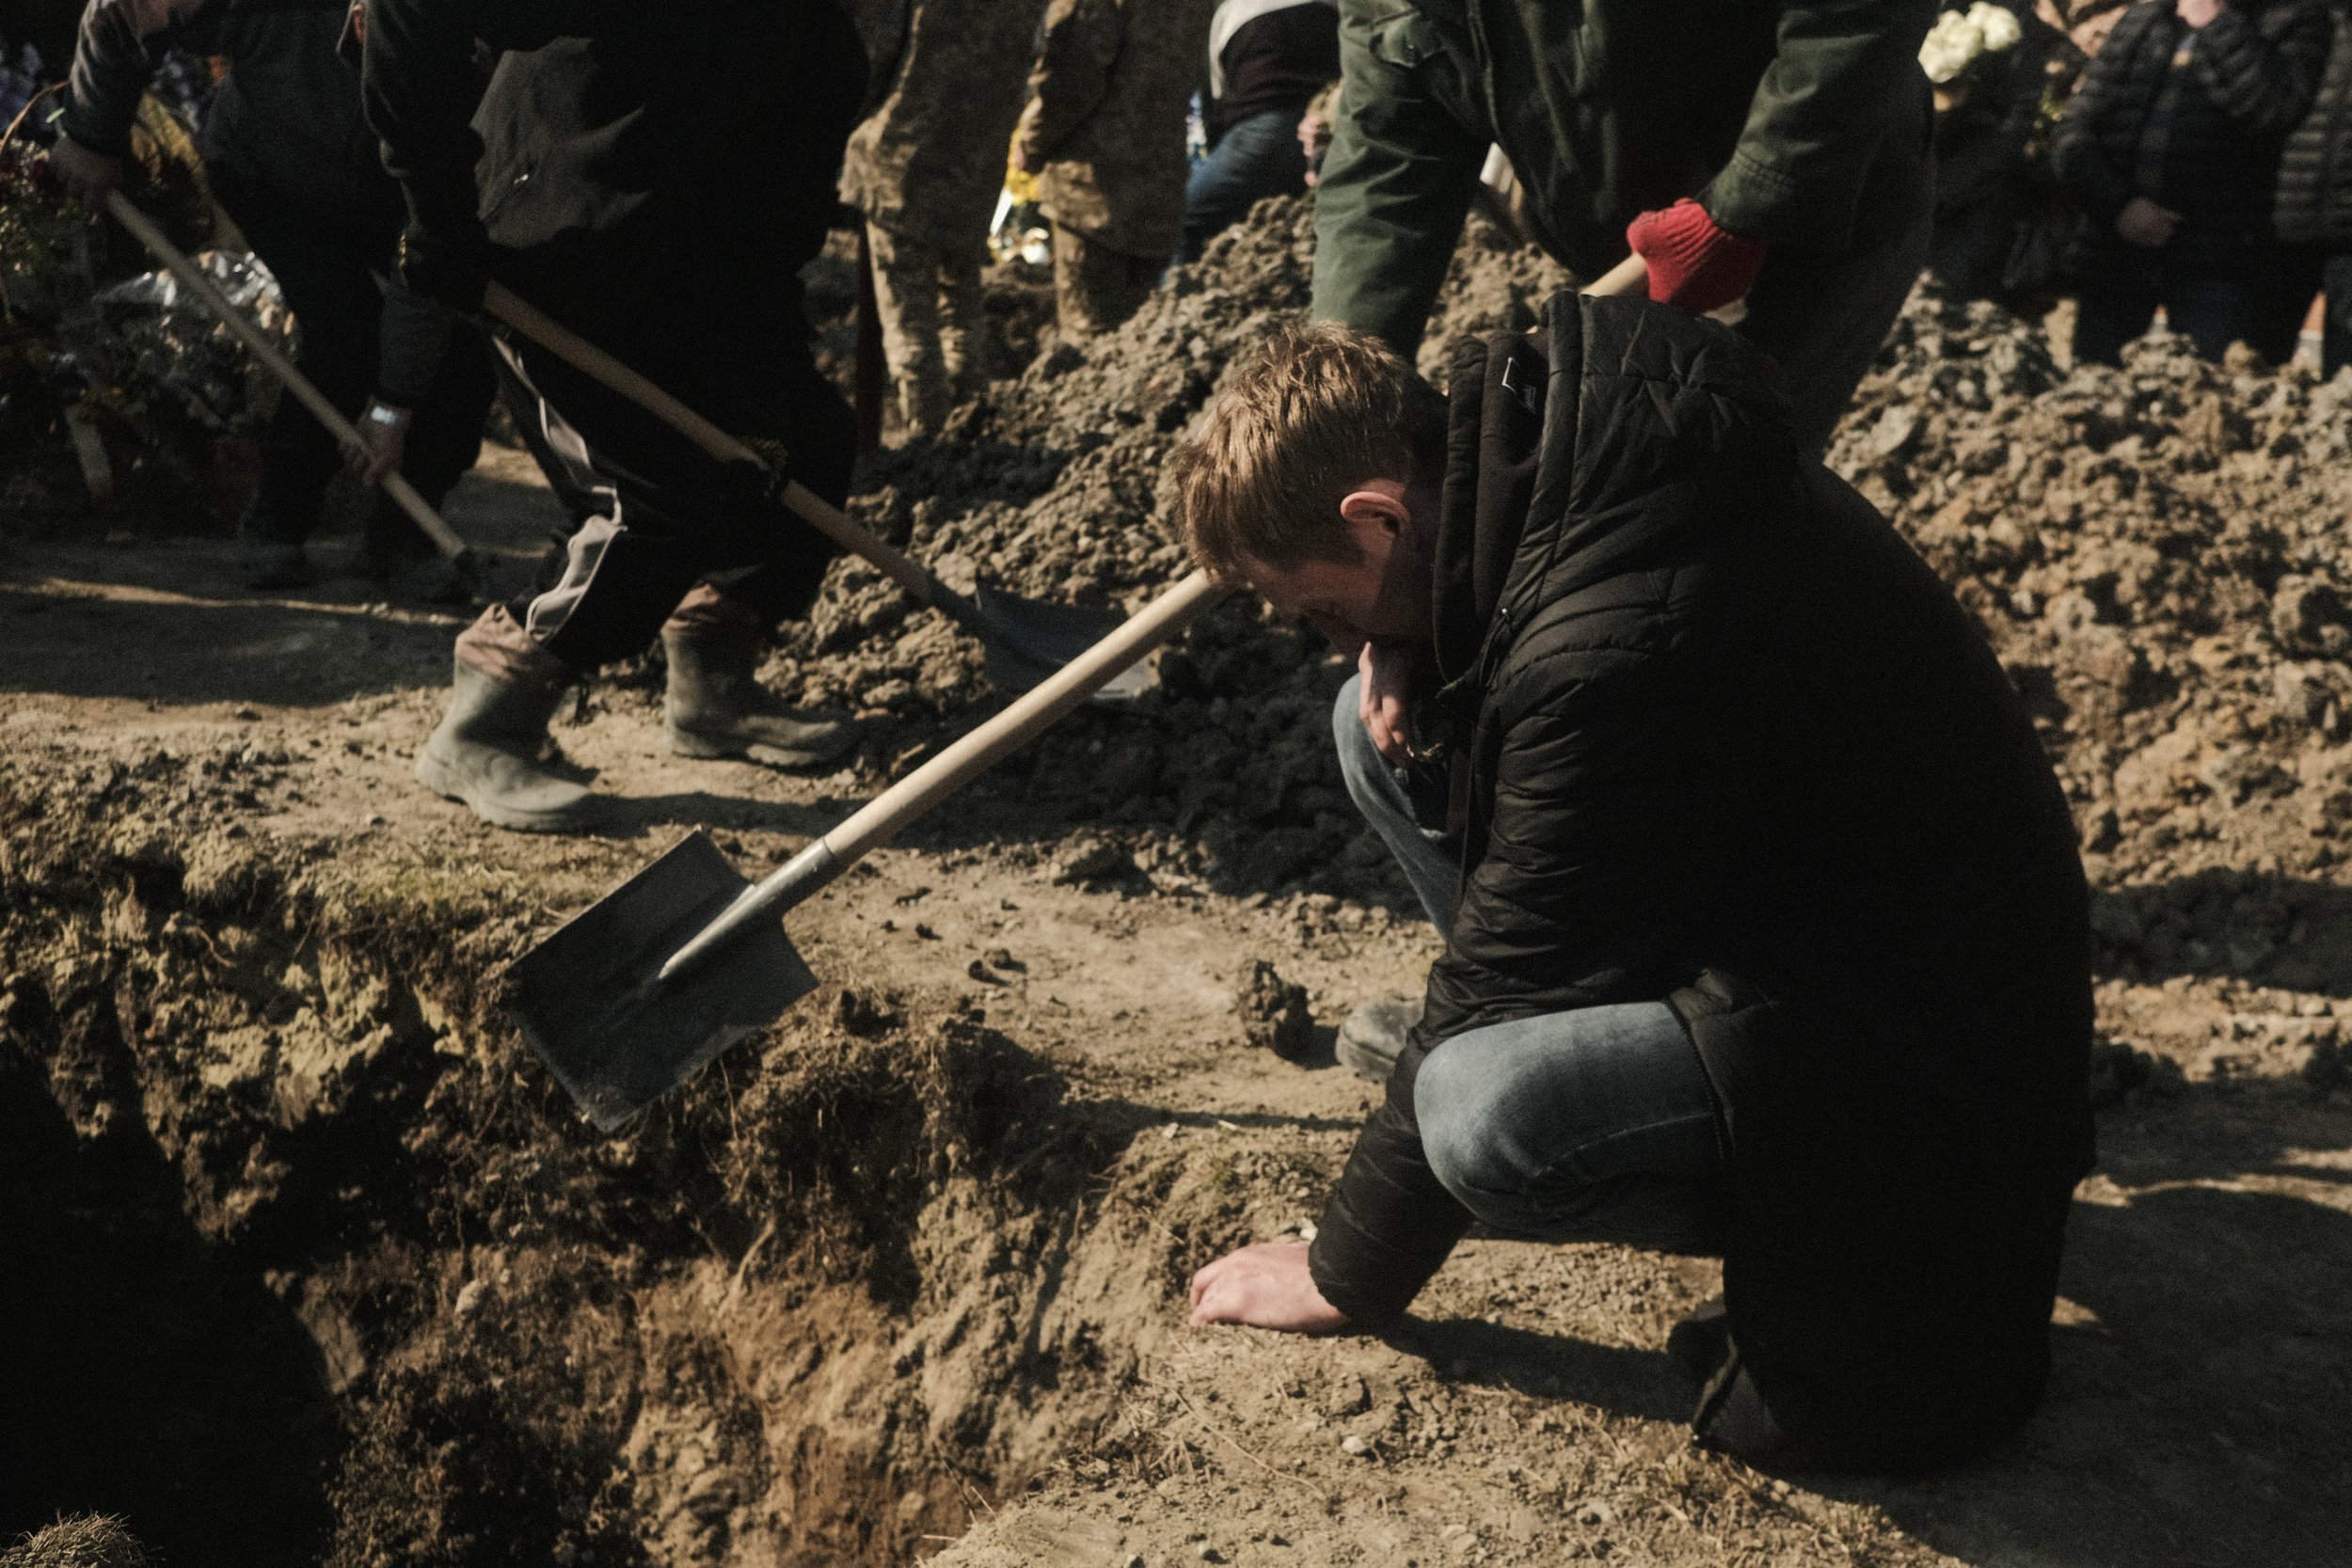  A man weeps by the grave of his brother who was killed by a Russian missile strike on Lviv, Ukraine on March 11, 2022. Despite Lviv being in the far western part of the country, Russian missile and drone attacks continue to claim casualties in areas